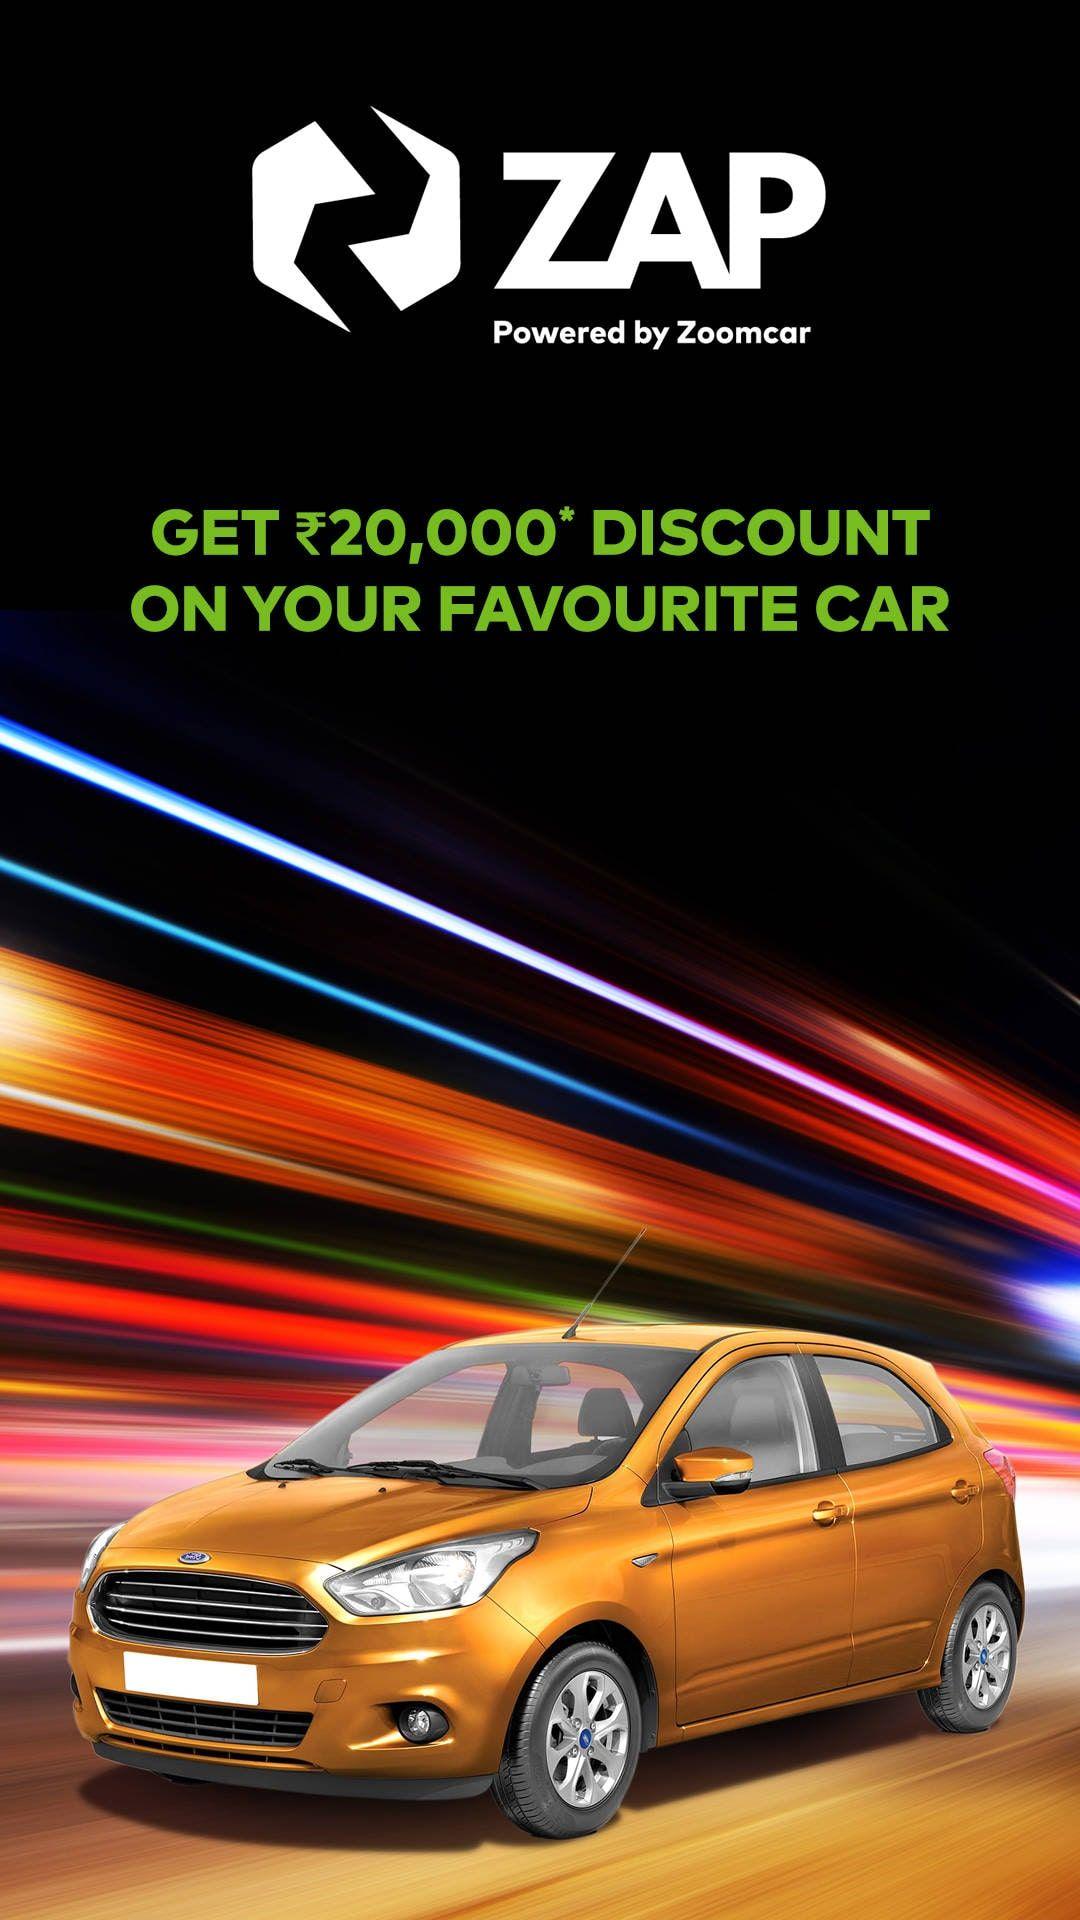 Zap Car Logo - Rs 20,000 off on your new car on ZAP Powered by Zoomcar Online |Paytm